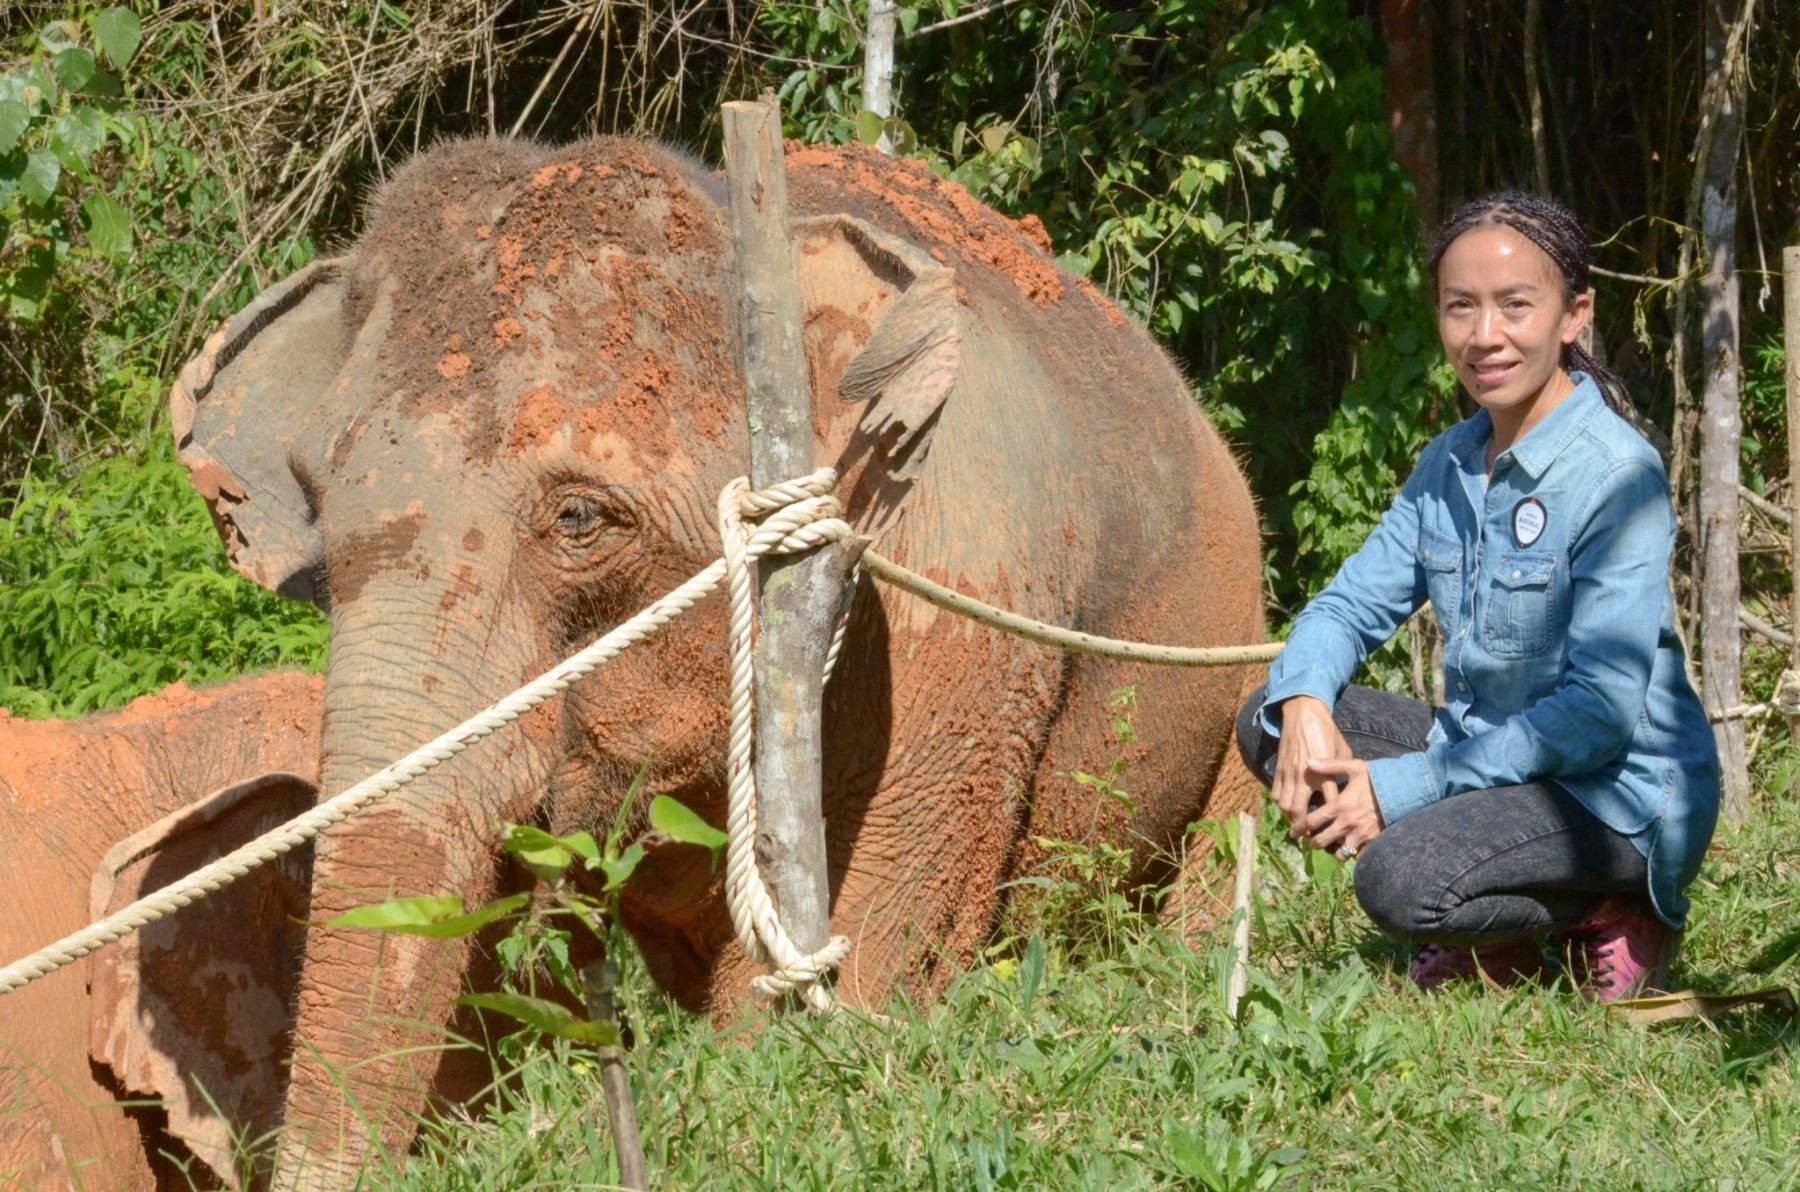 Dee Kenyon, Elephant Venue Project Manager for World Animal Protection poses with an elephant at Chang Chill, Thailand.